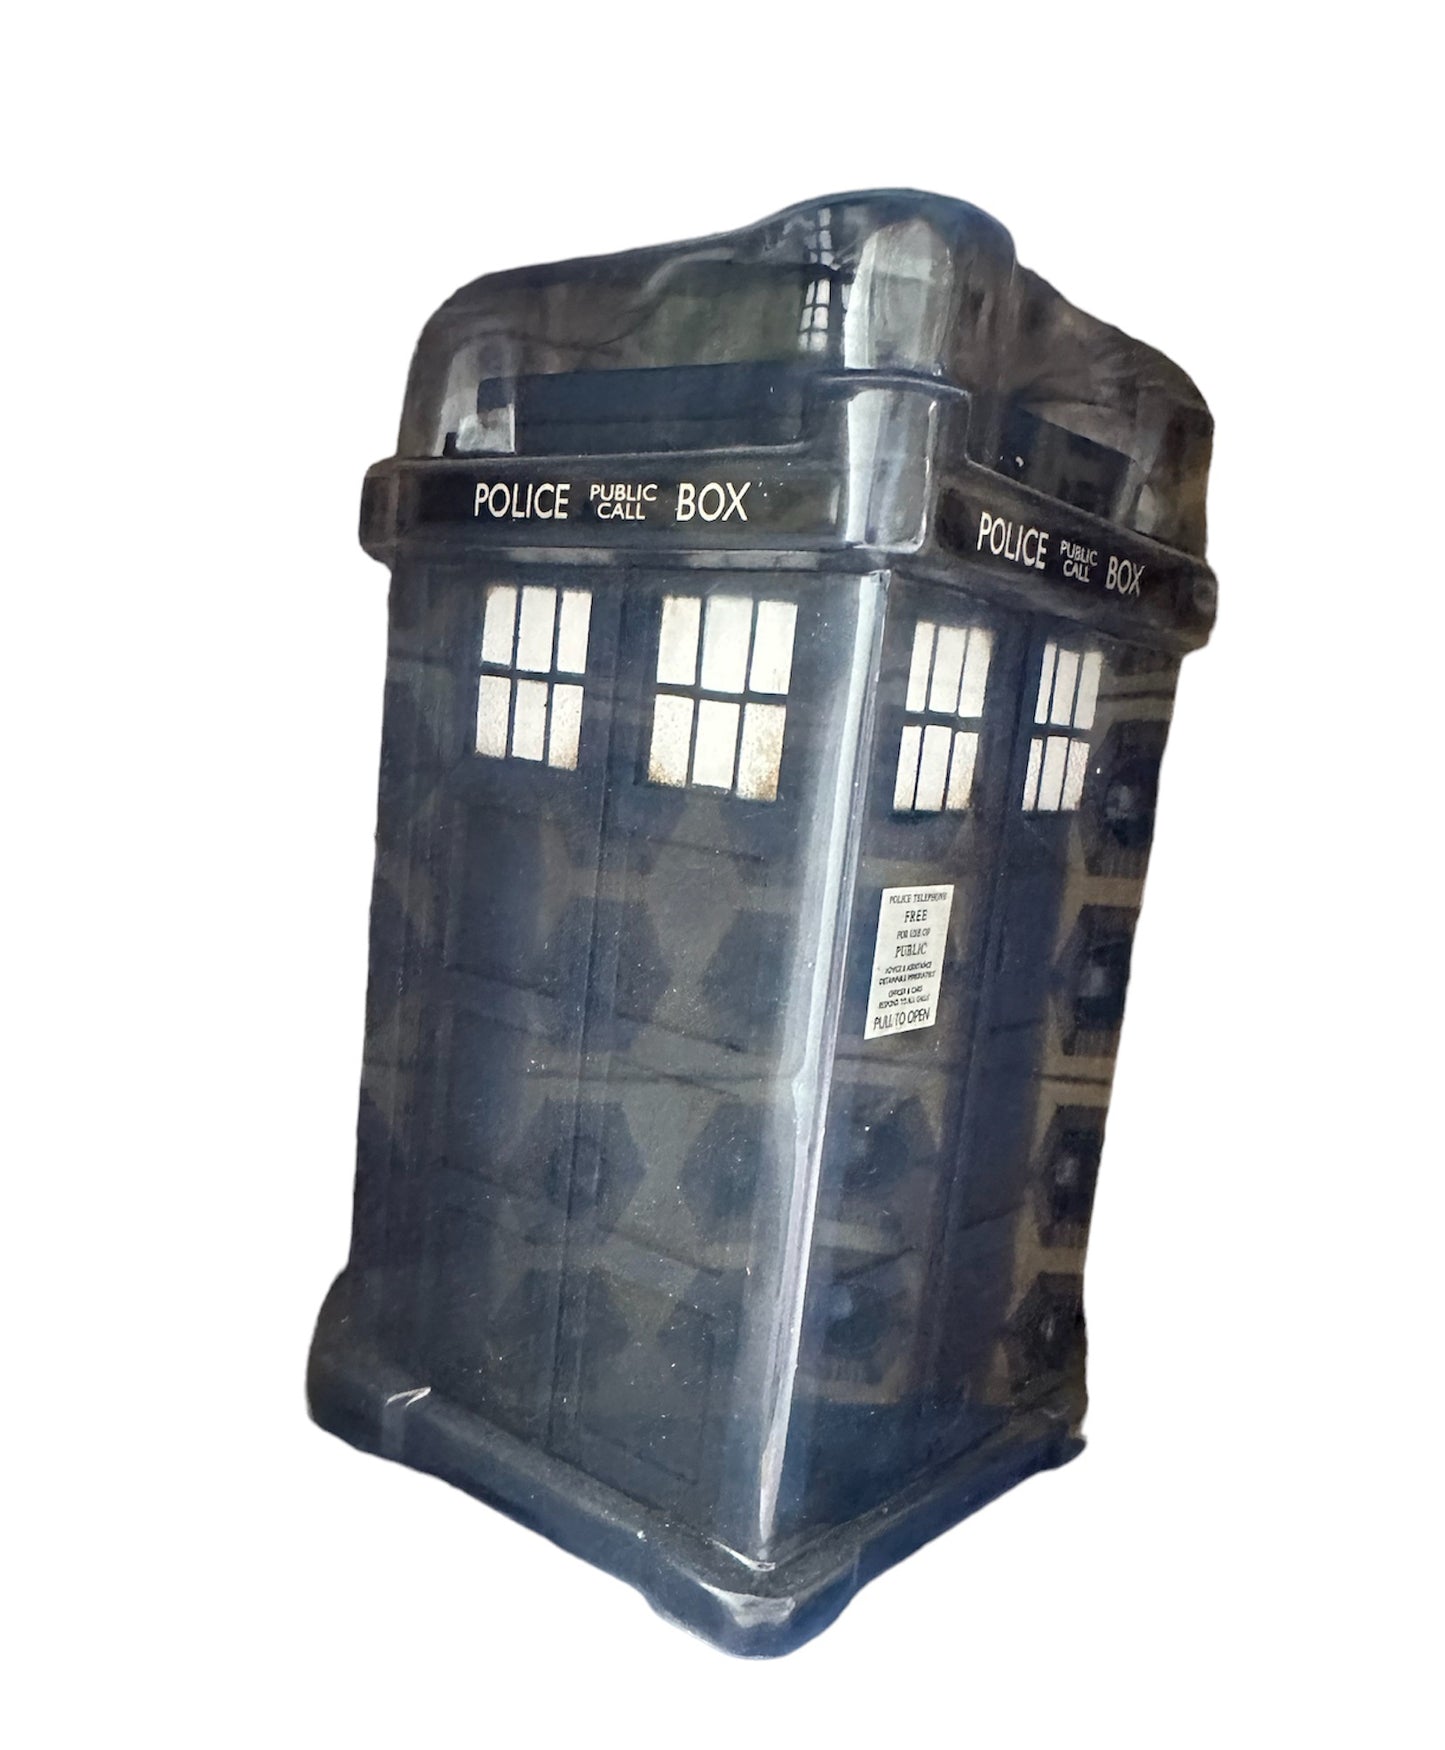 Vintage 2006 Doctor Dr Who - Diecast Collectable Tardis - Brand New Factory Sealed Shop Stock Room Find